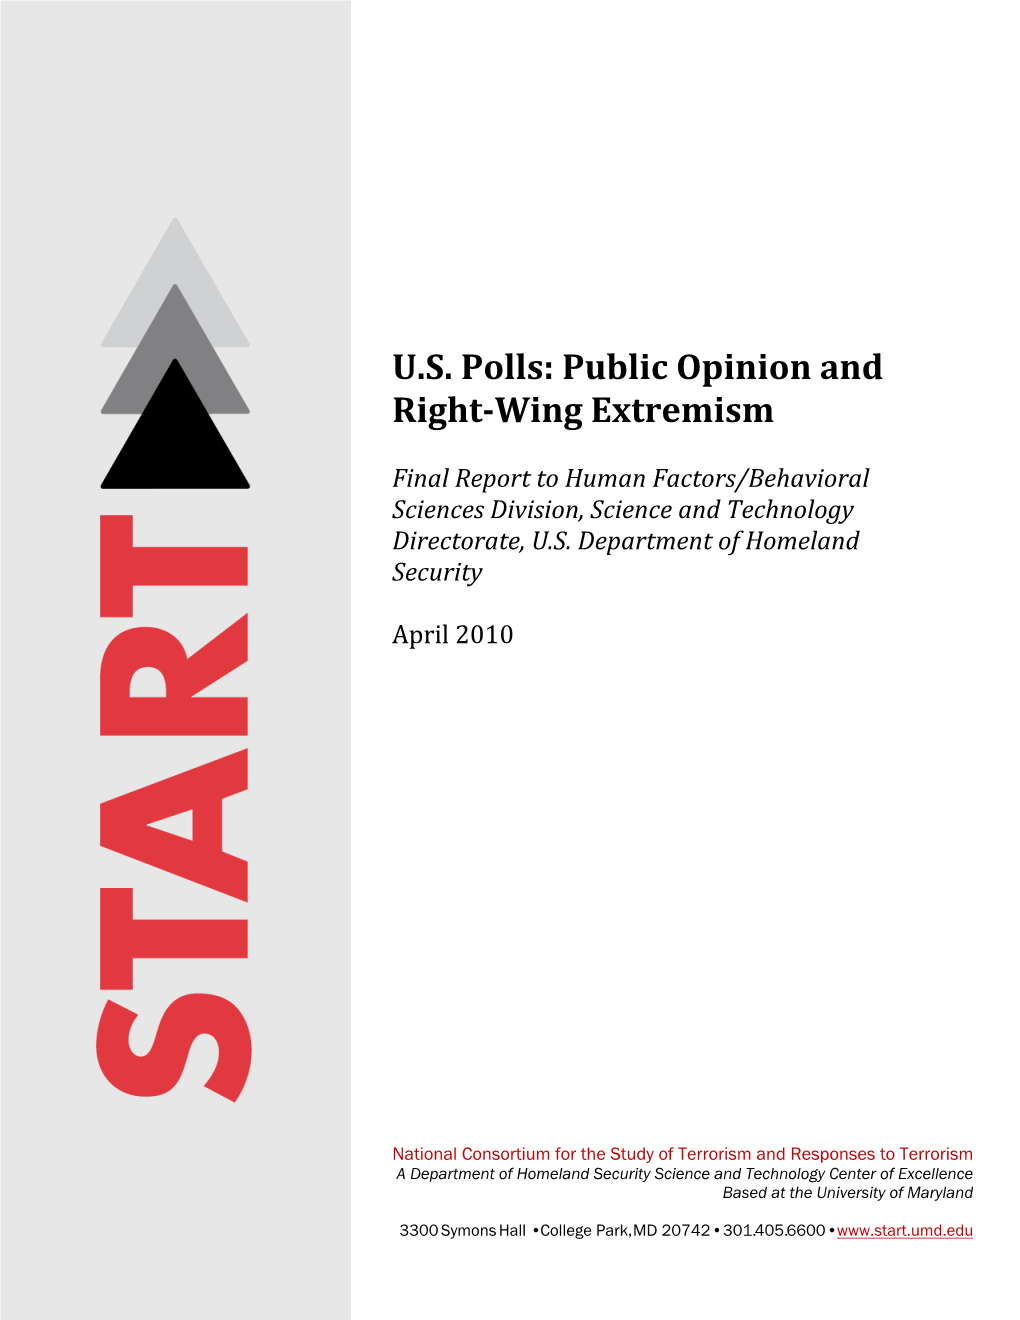 U.S. Polls: Public Opinion and Right‐Wing Extremism, April 2010